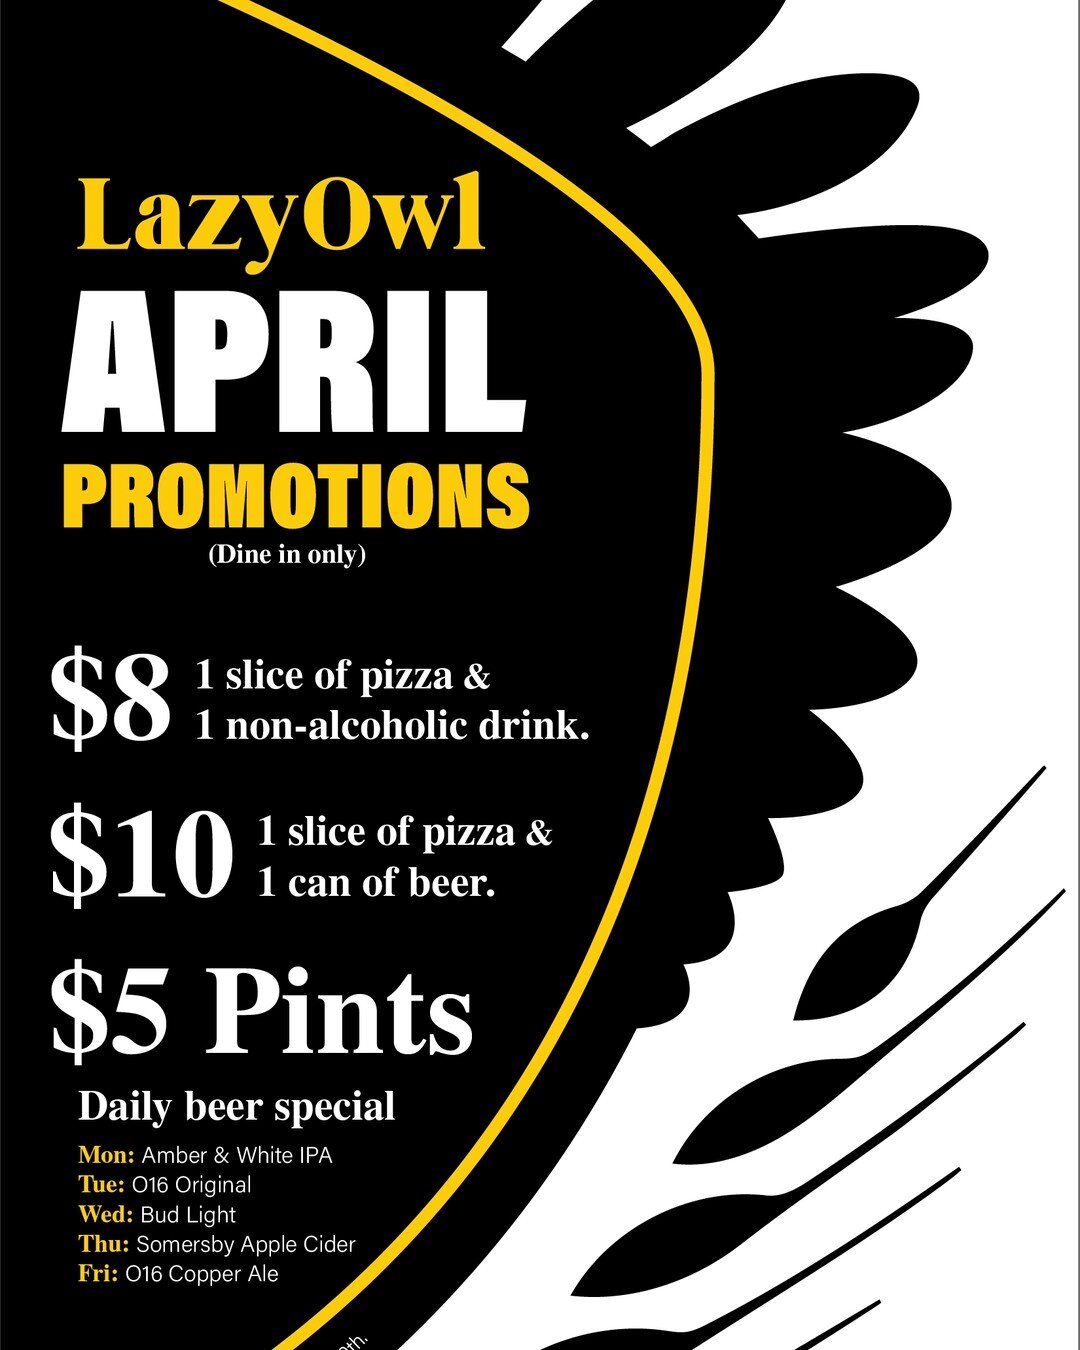 The Lazy Owl will be closing for the spring/summer season at the end of the week, so get your pizza before it's too late!  We've got lots of food and drink deals so come on down!
Even though The Lazy Owl will be closing, we are still available for ev